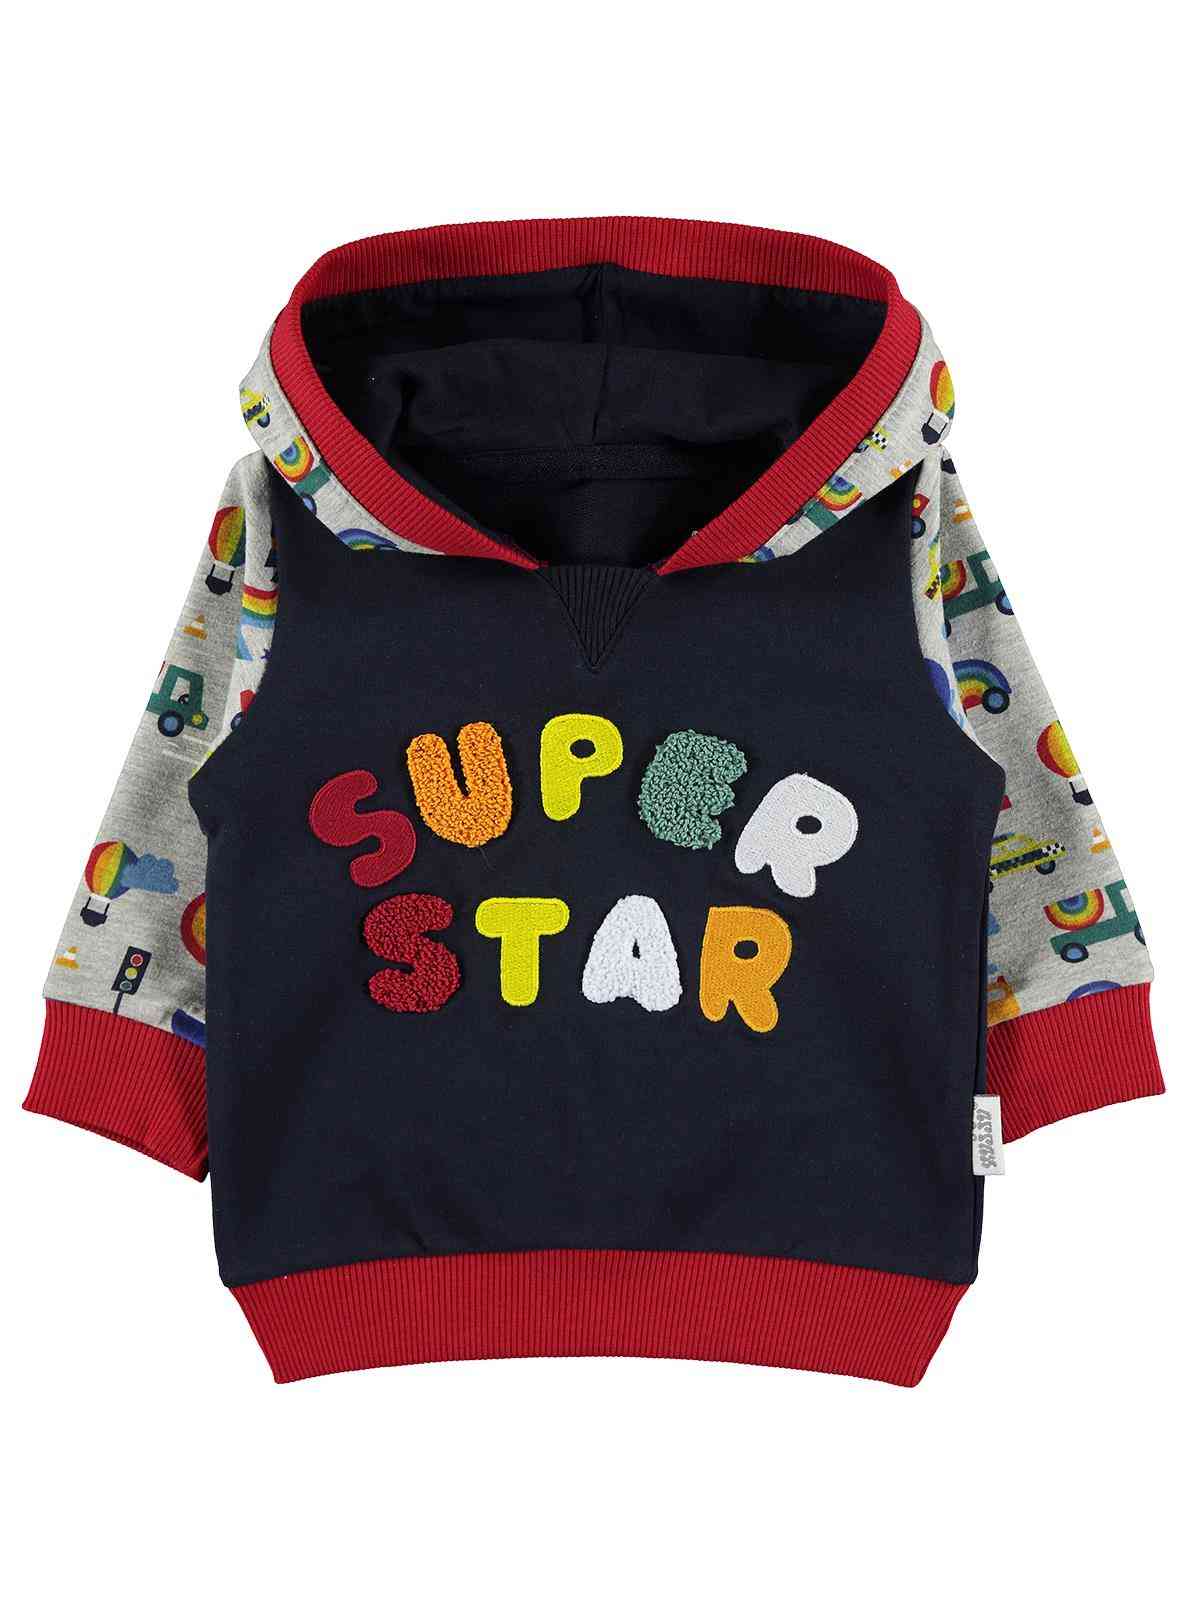 Casual Style- Cotton Armor Jersey, Hoodie Jacket, Sweatshirt For Boy